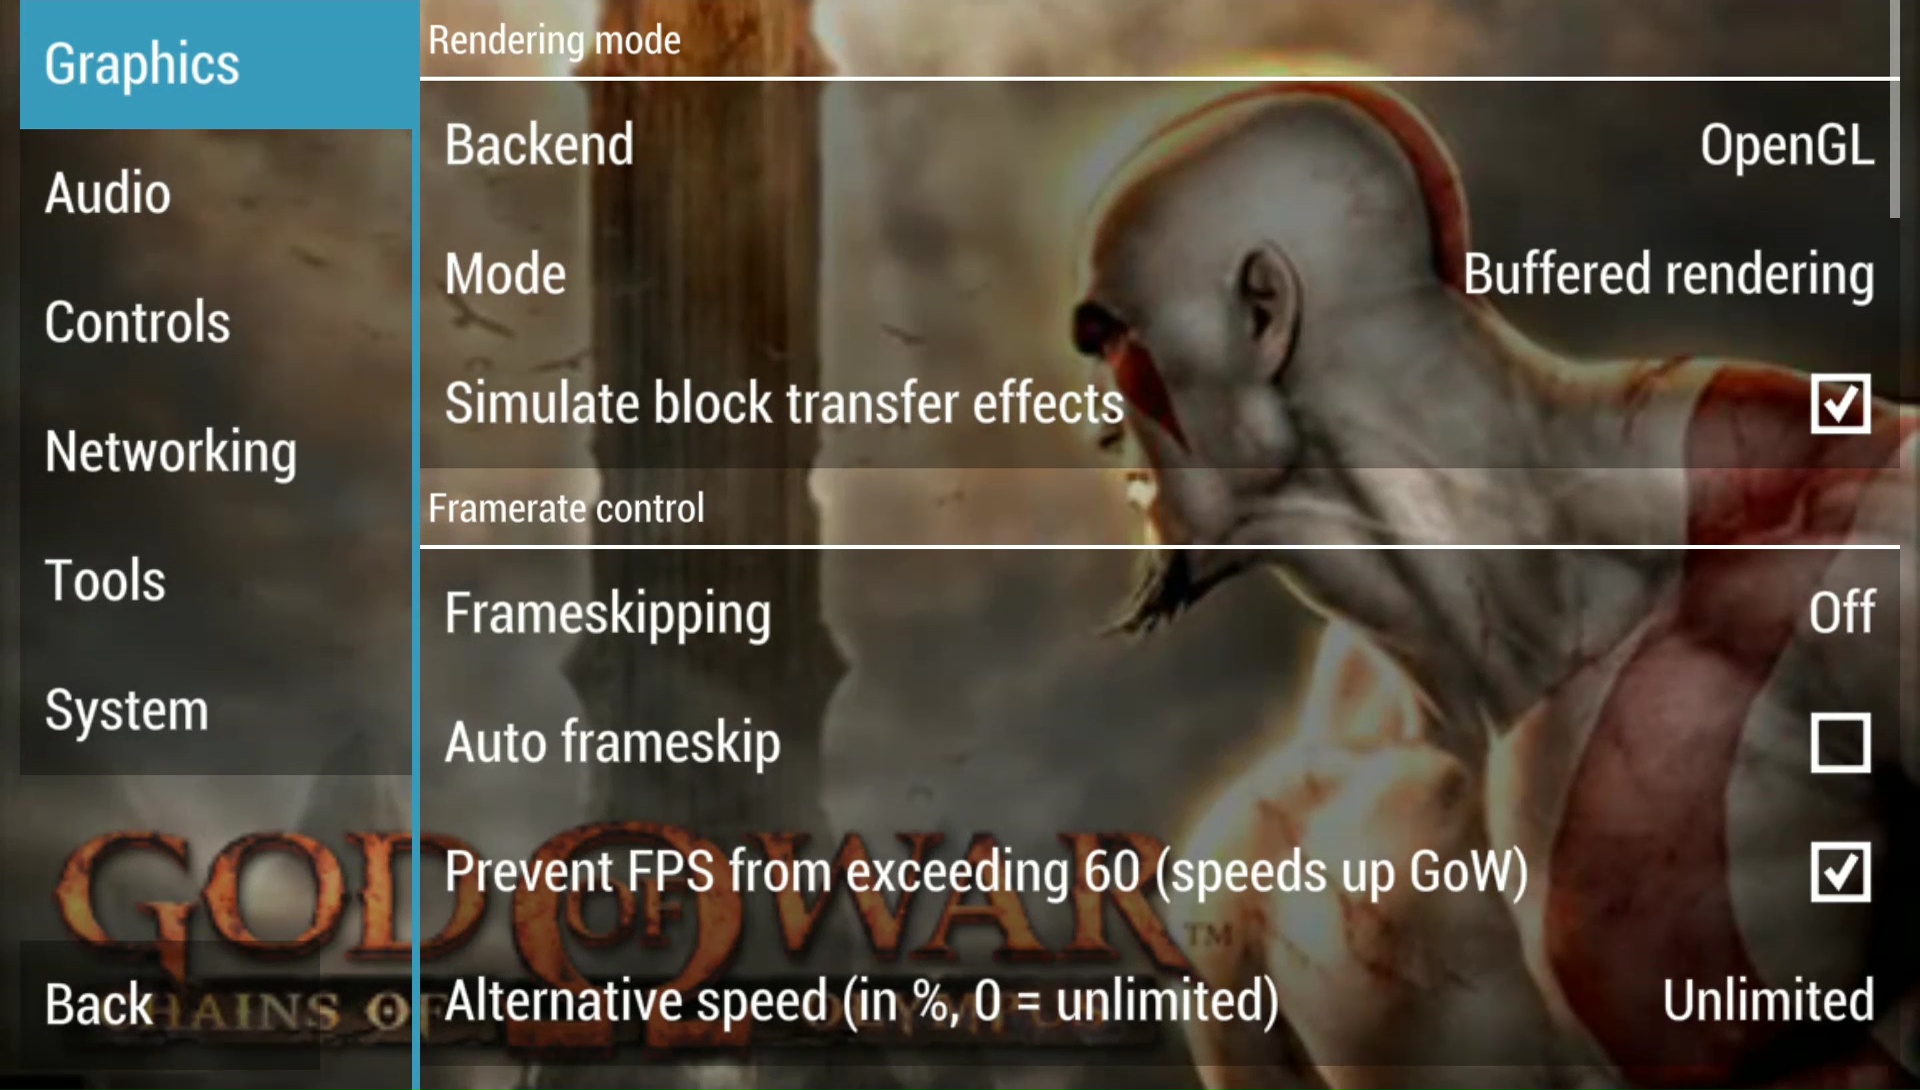 Download Cheats for PPSSPP God of War Chains of Olympus android on PC